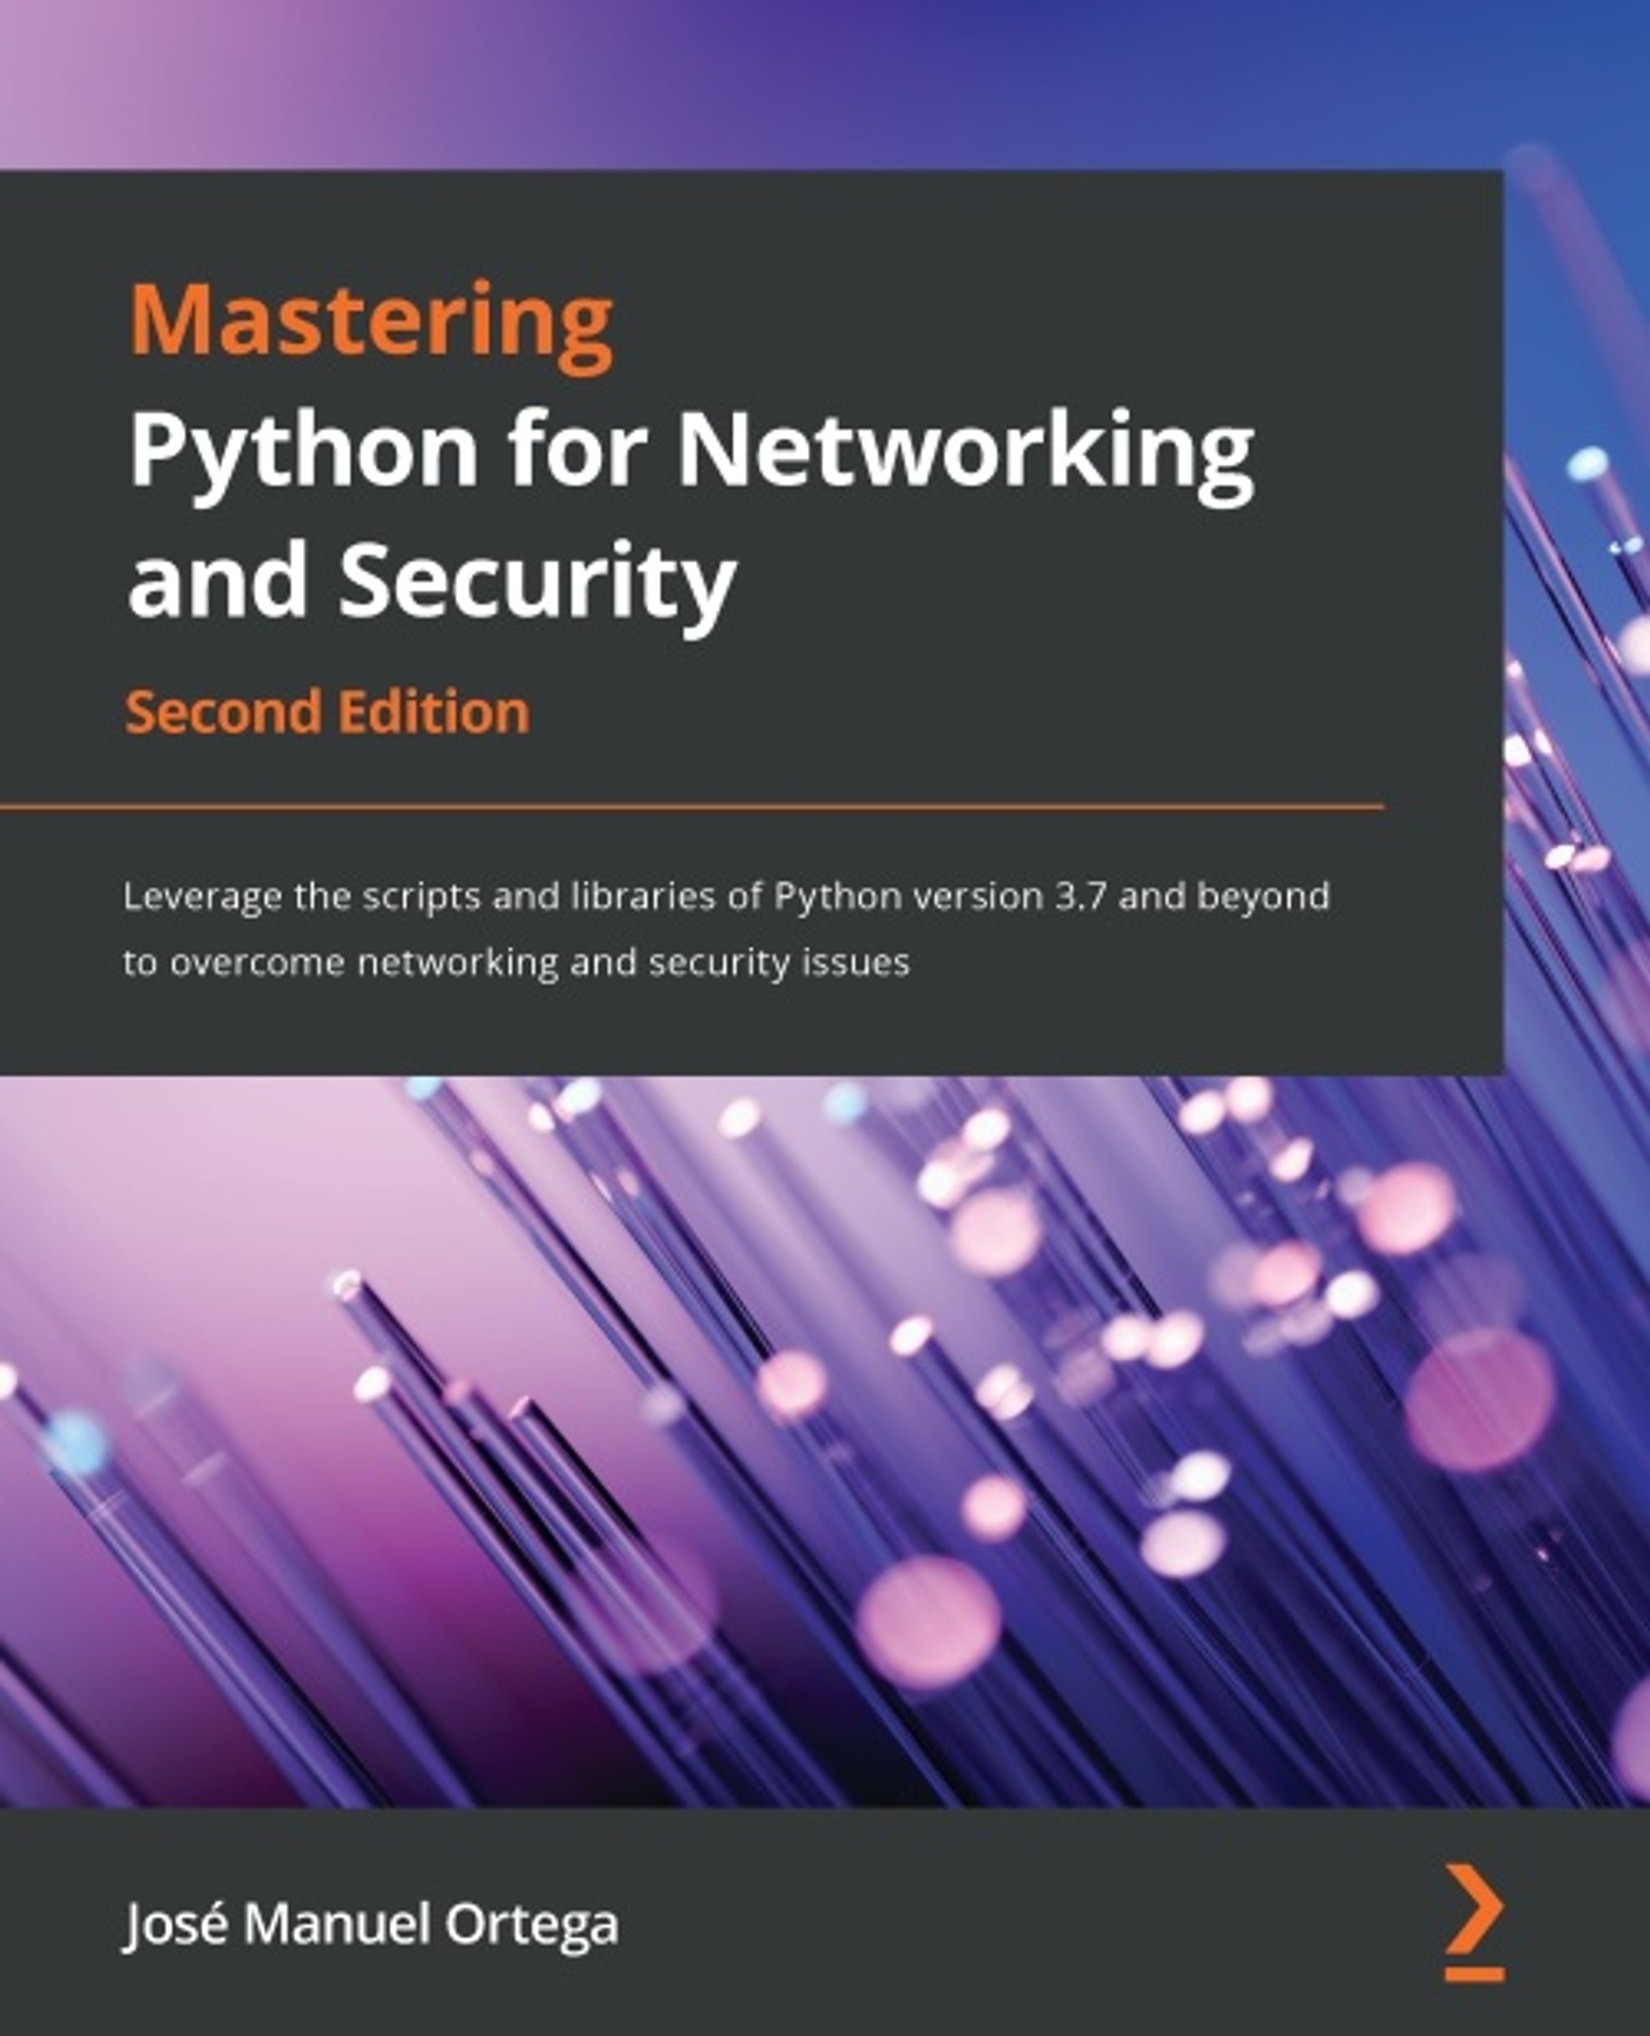 Mastering Python for Networking and Security: Leverage the Scripts and Libraries of Python Version 3.7 and Beyond to Overcome Networking and Security Issues